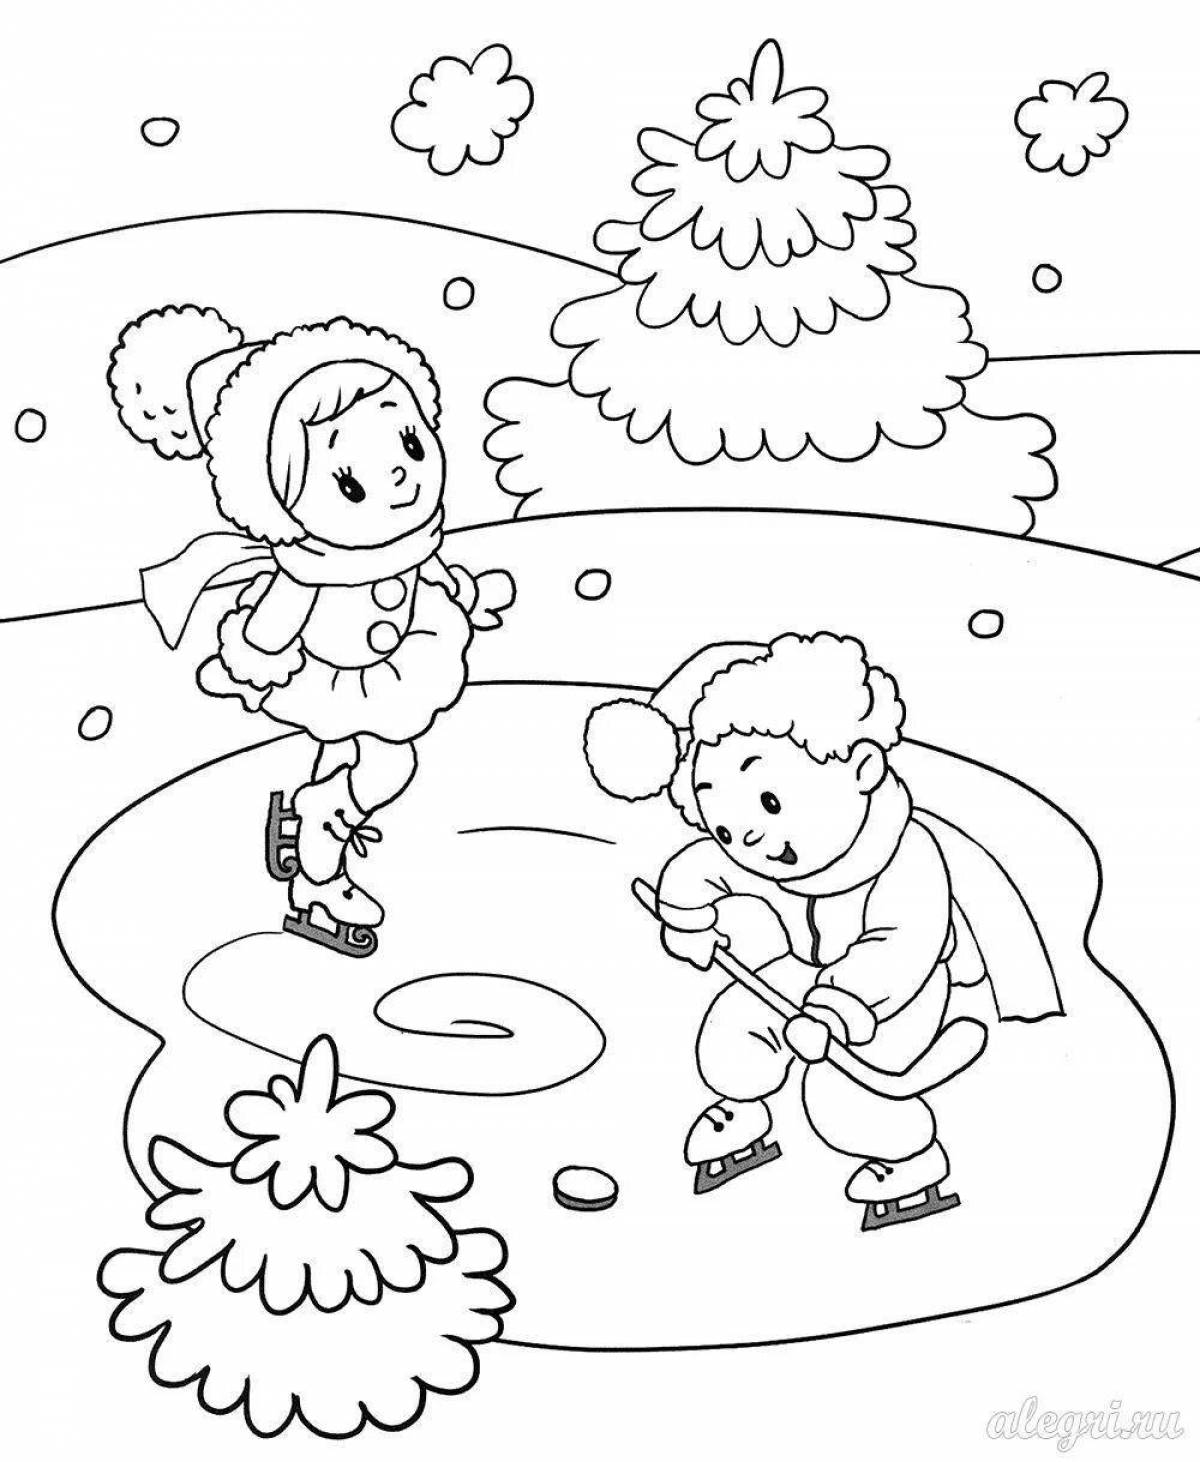 Awesome winter coloring pages for kids 2 3